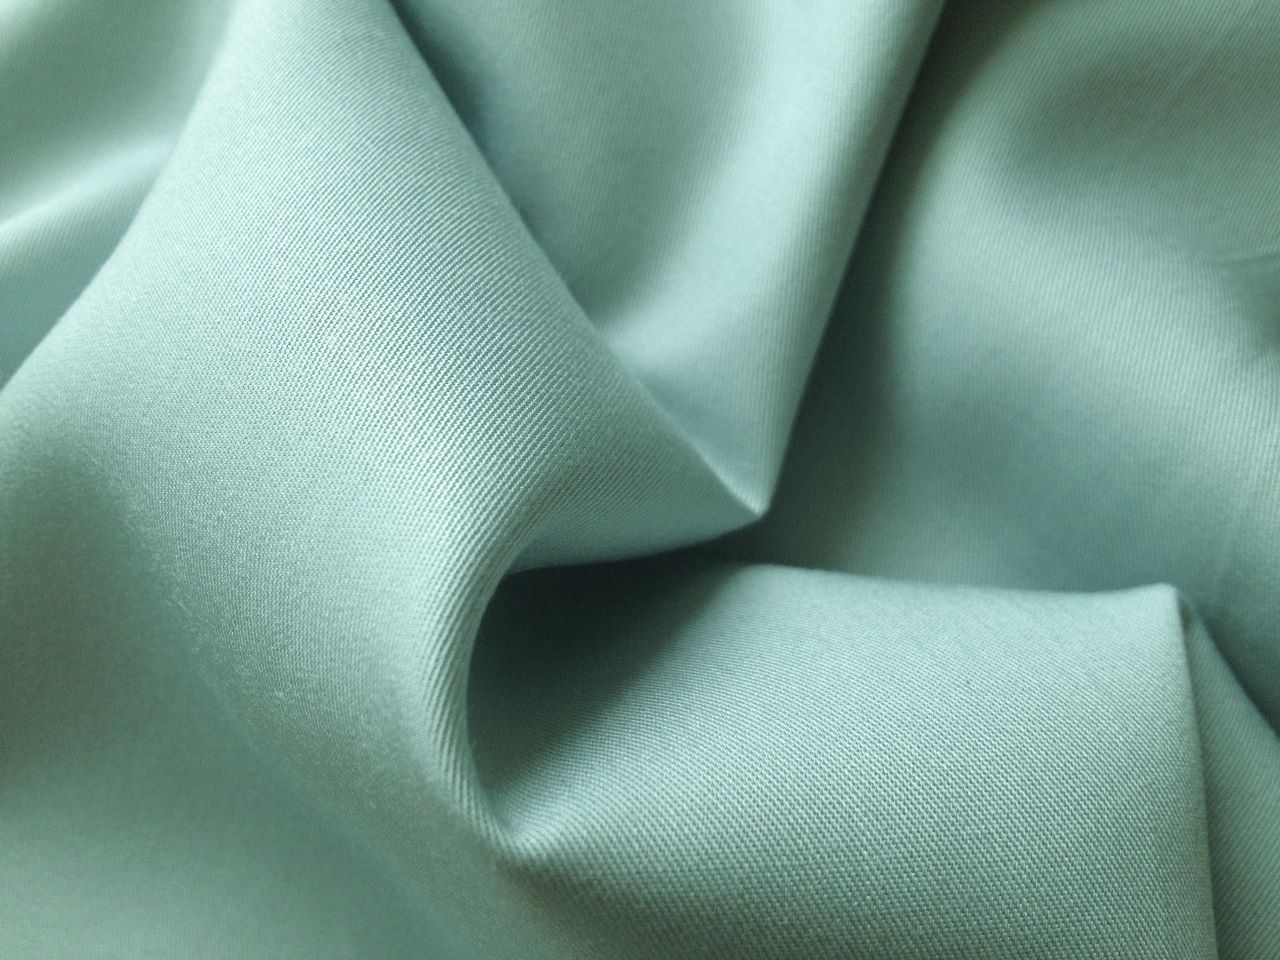 bamboofabrictwill50-bamboo505polyester40s-2x40s-2108x5801